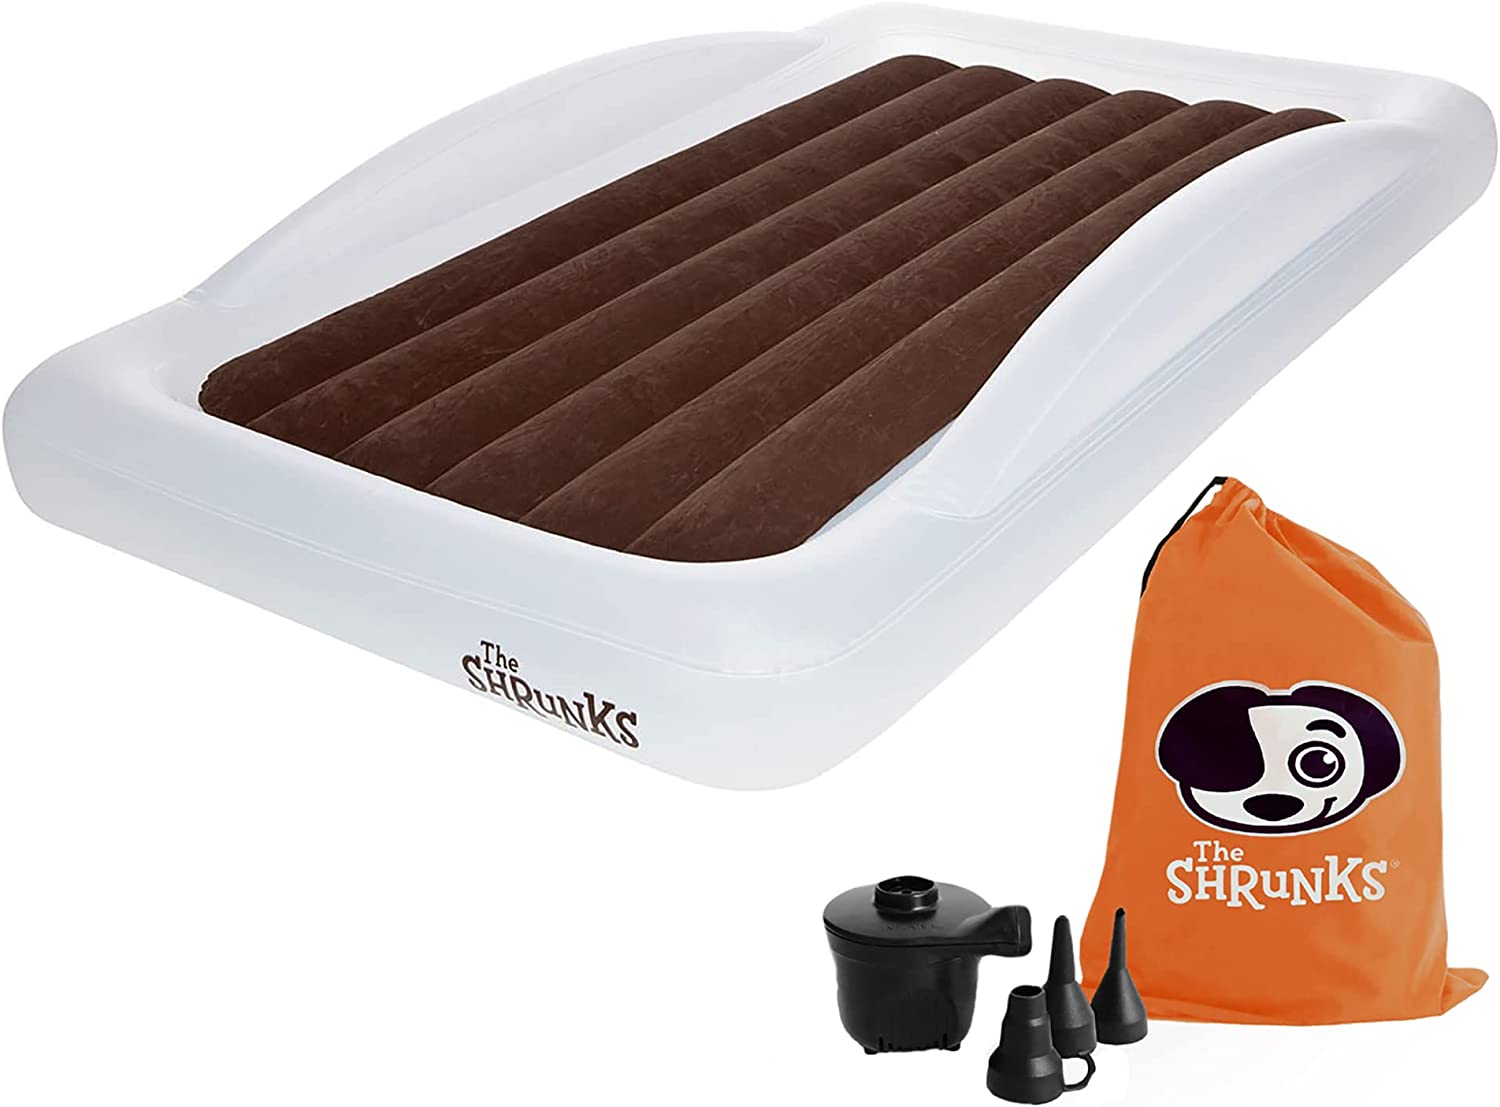 The Shrunks Toddler Travel Bed | Portable Inflatable Kids Air Mattress | Blow Up Bed for Indoor/Outdoor Camping, Hotel, or Home Use | Toddler Air Mattress Floor Bed with Bed Rails and Electric Pump